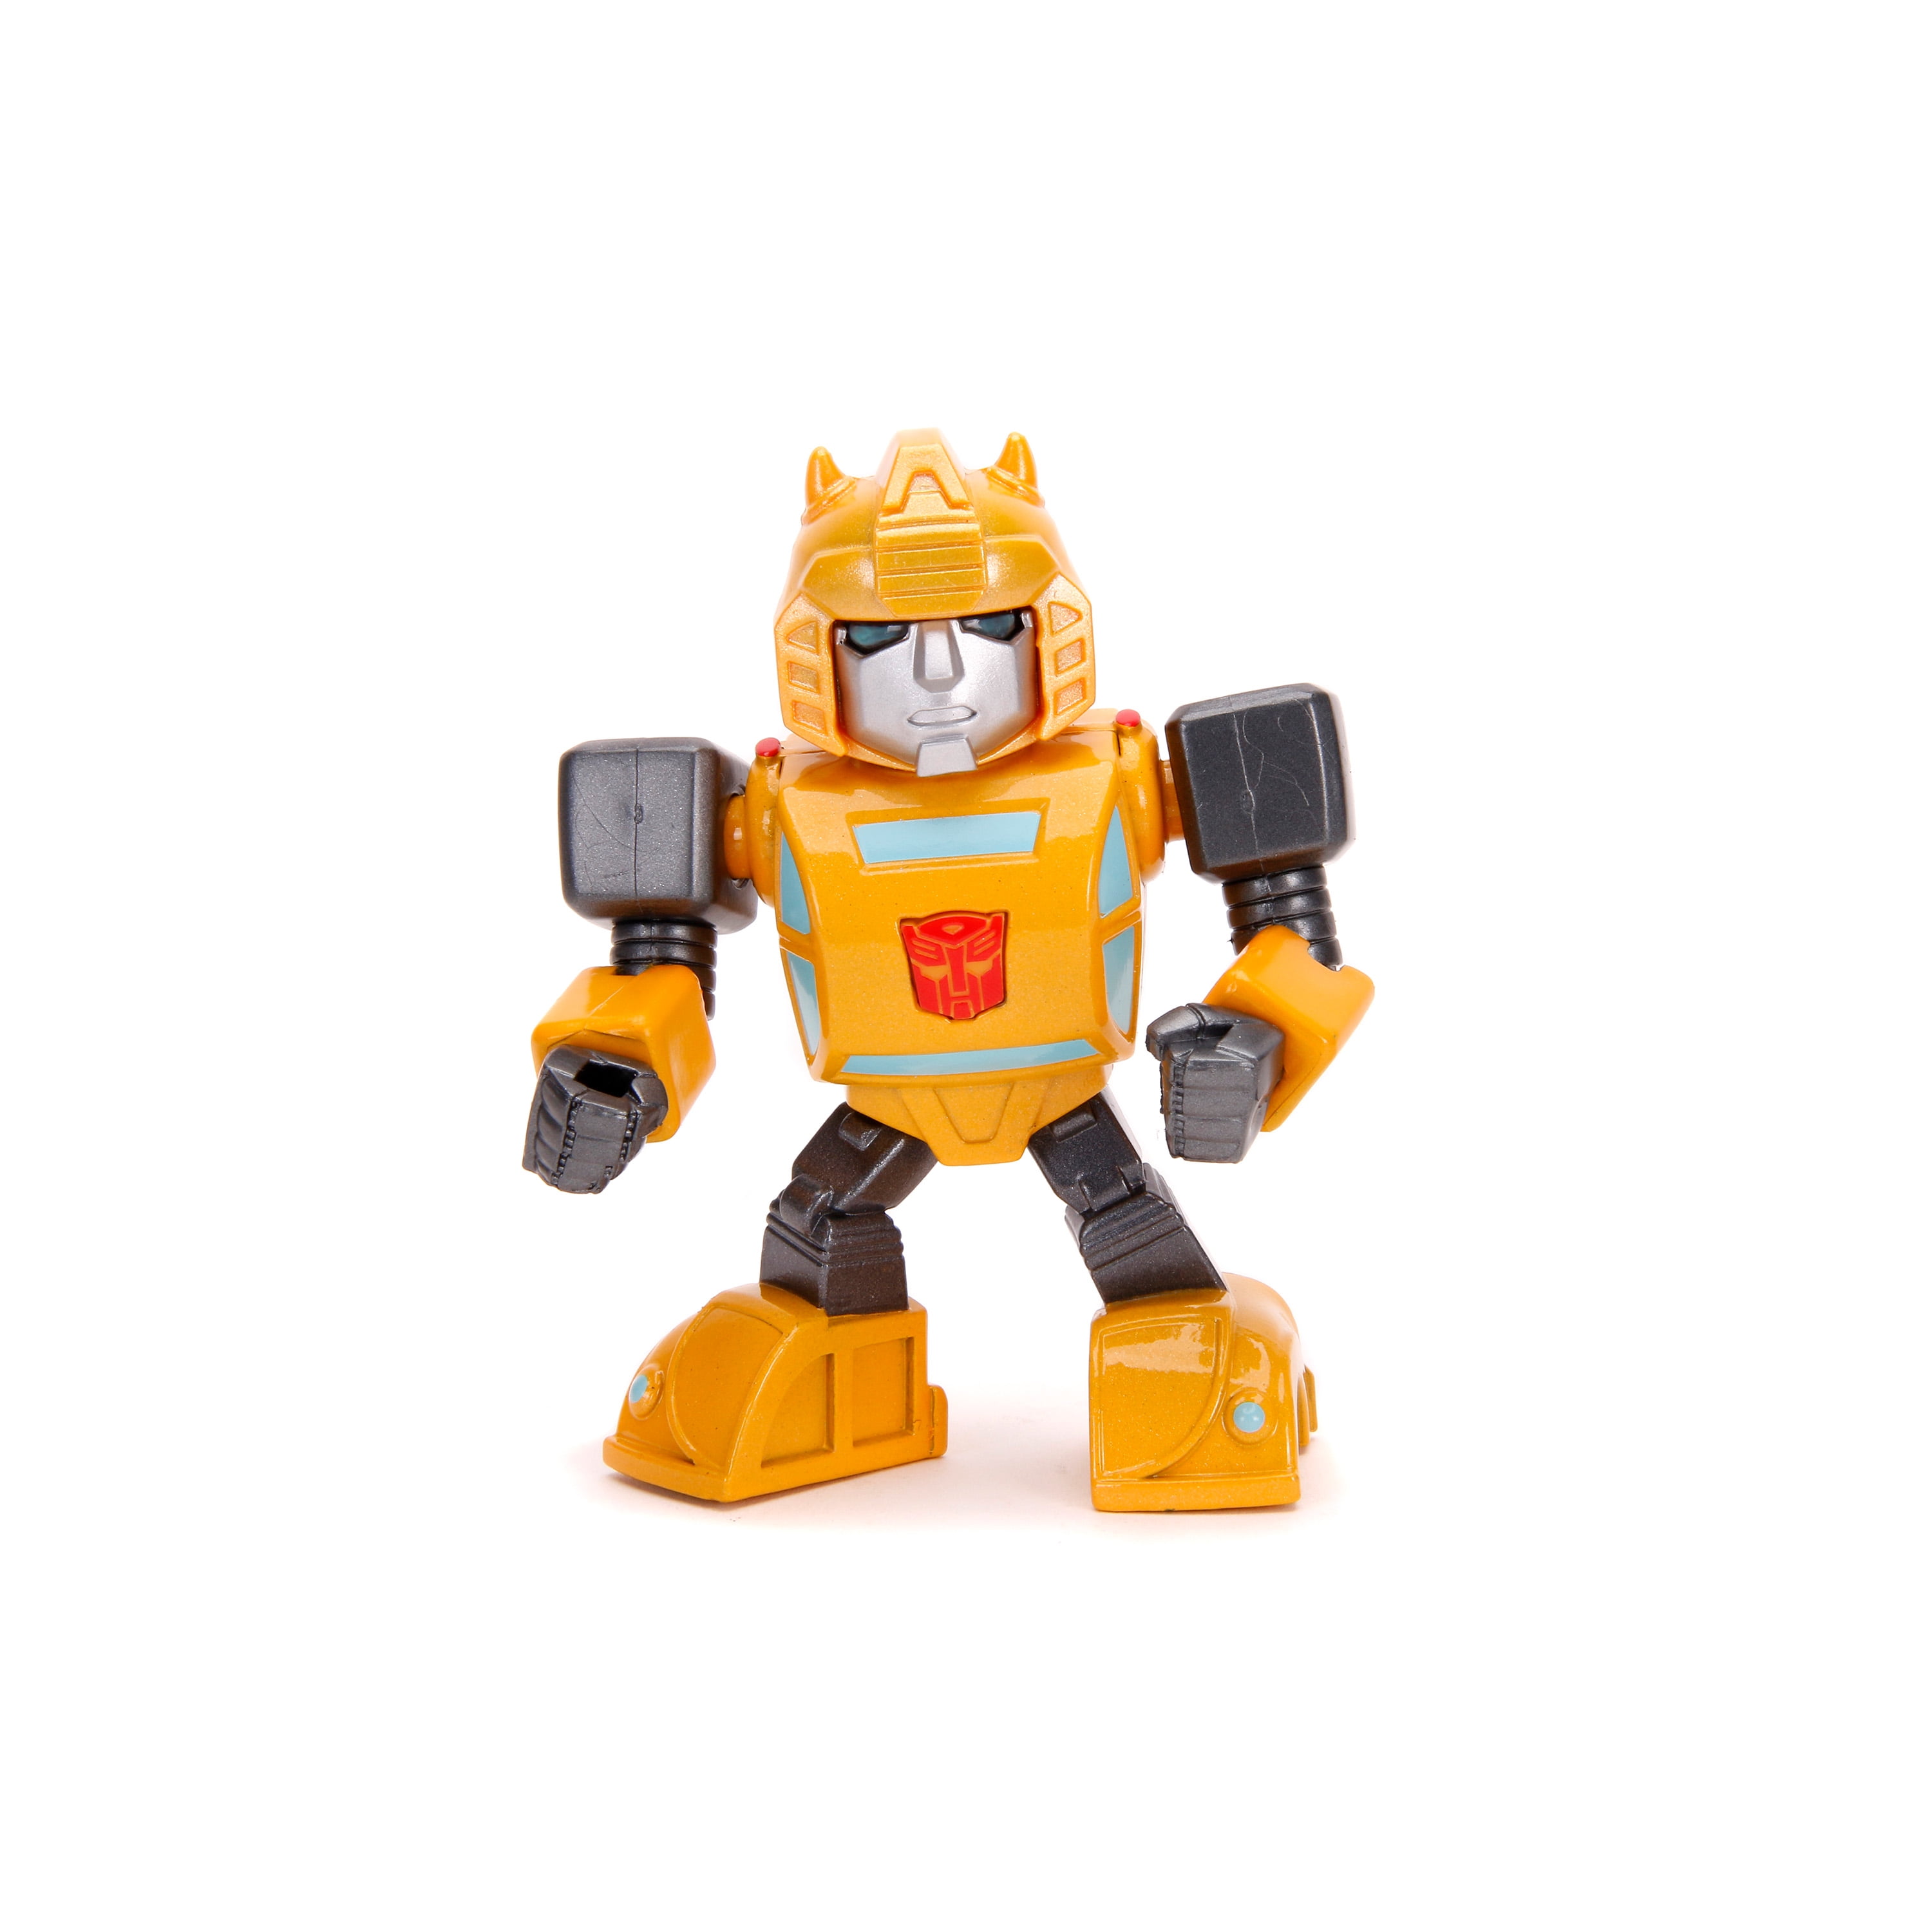 3-Piece Free Shipping Multicolored Hasbro Transformers Bumblebee Dinner Set 